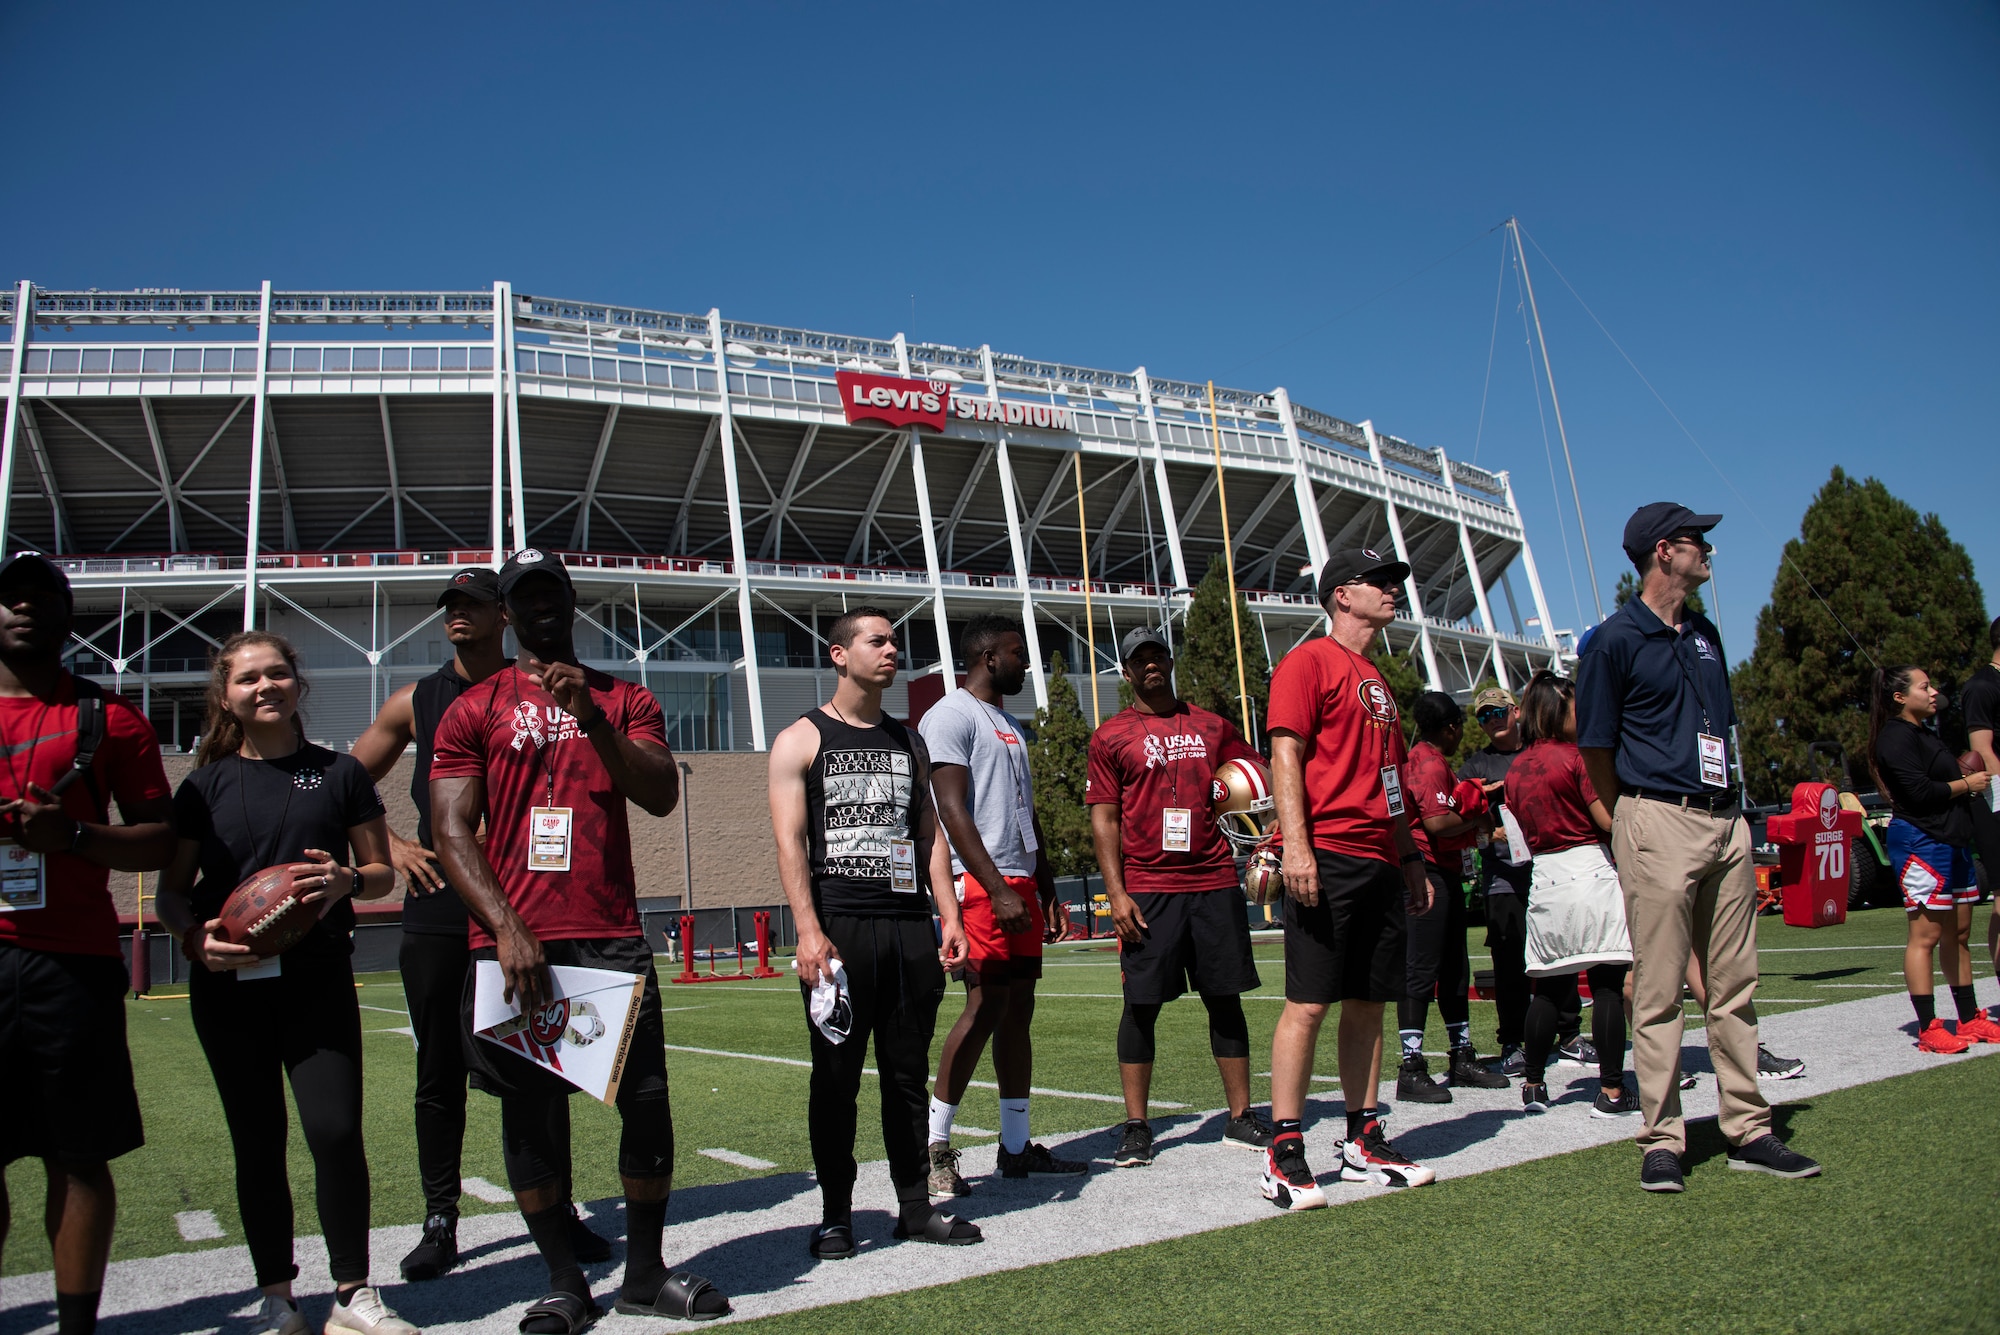 U.S. Airmen from Travis Air Force Base, California, watch as the San Francisco 49ers practice Aug. 13, 2019, during the Salute to Service Boot Camp in Santa Clara, California. Fifty Airmen attended the event from numerous units. The event provided Airmen with an opportunity to interact with NFL players and compete against one another in a variety of athletic drills. (U.S. Air Force photo by Tech. Sgt. James Hodgman)